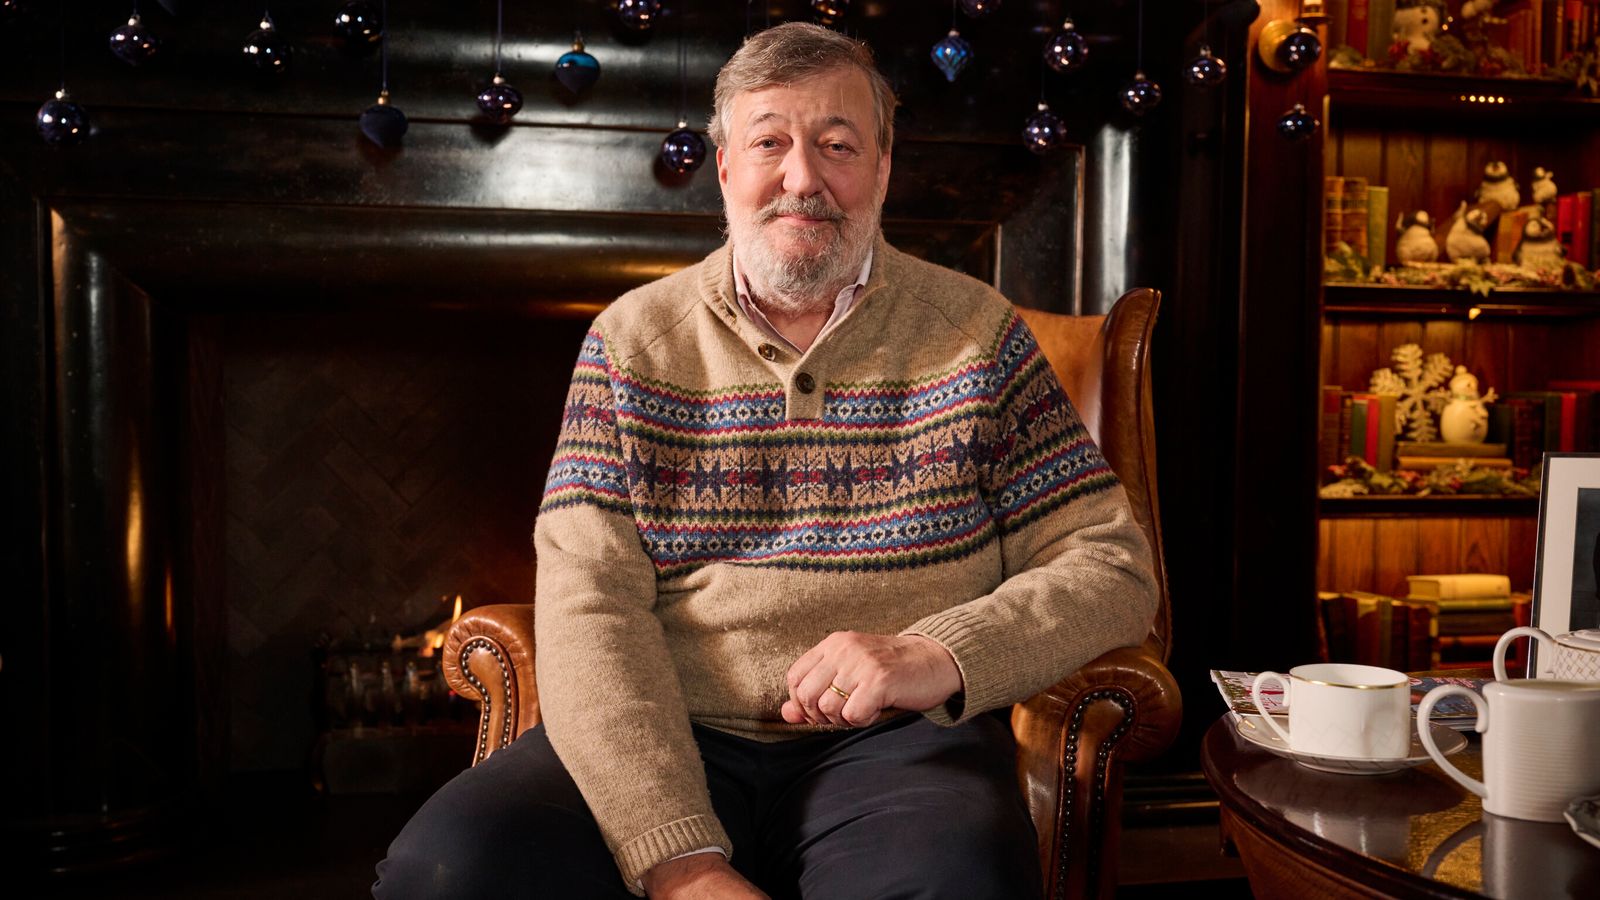 Stephen Fry to deliver Channel 4's alternative Christmas message